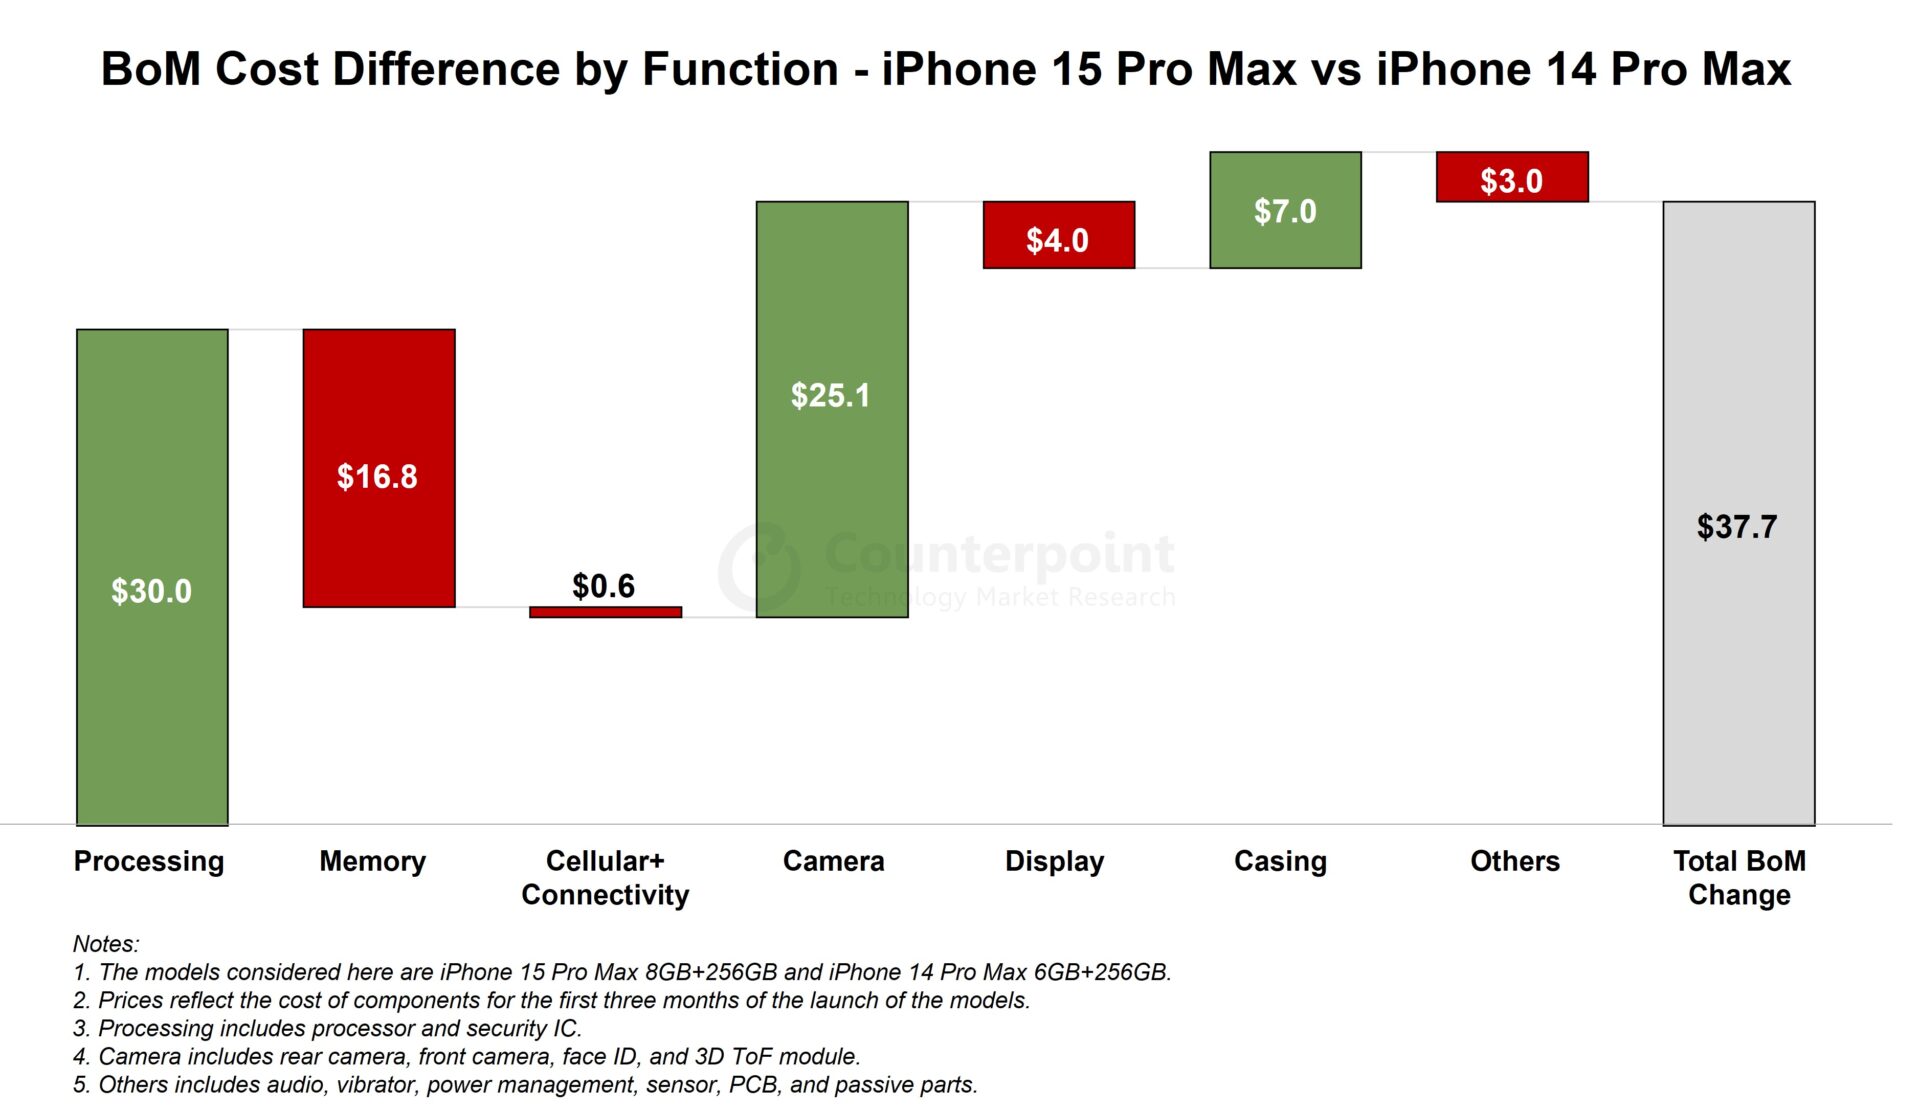 iPhone-15-Pro-Max-Bill-of-Materials-analysis-from-Counterpoint-Research.jpeg